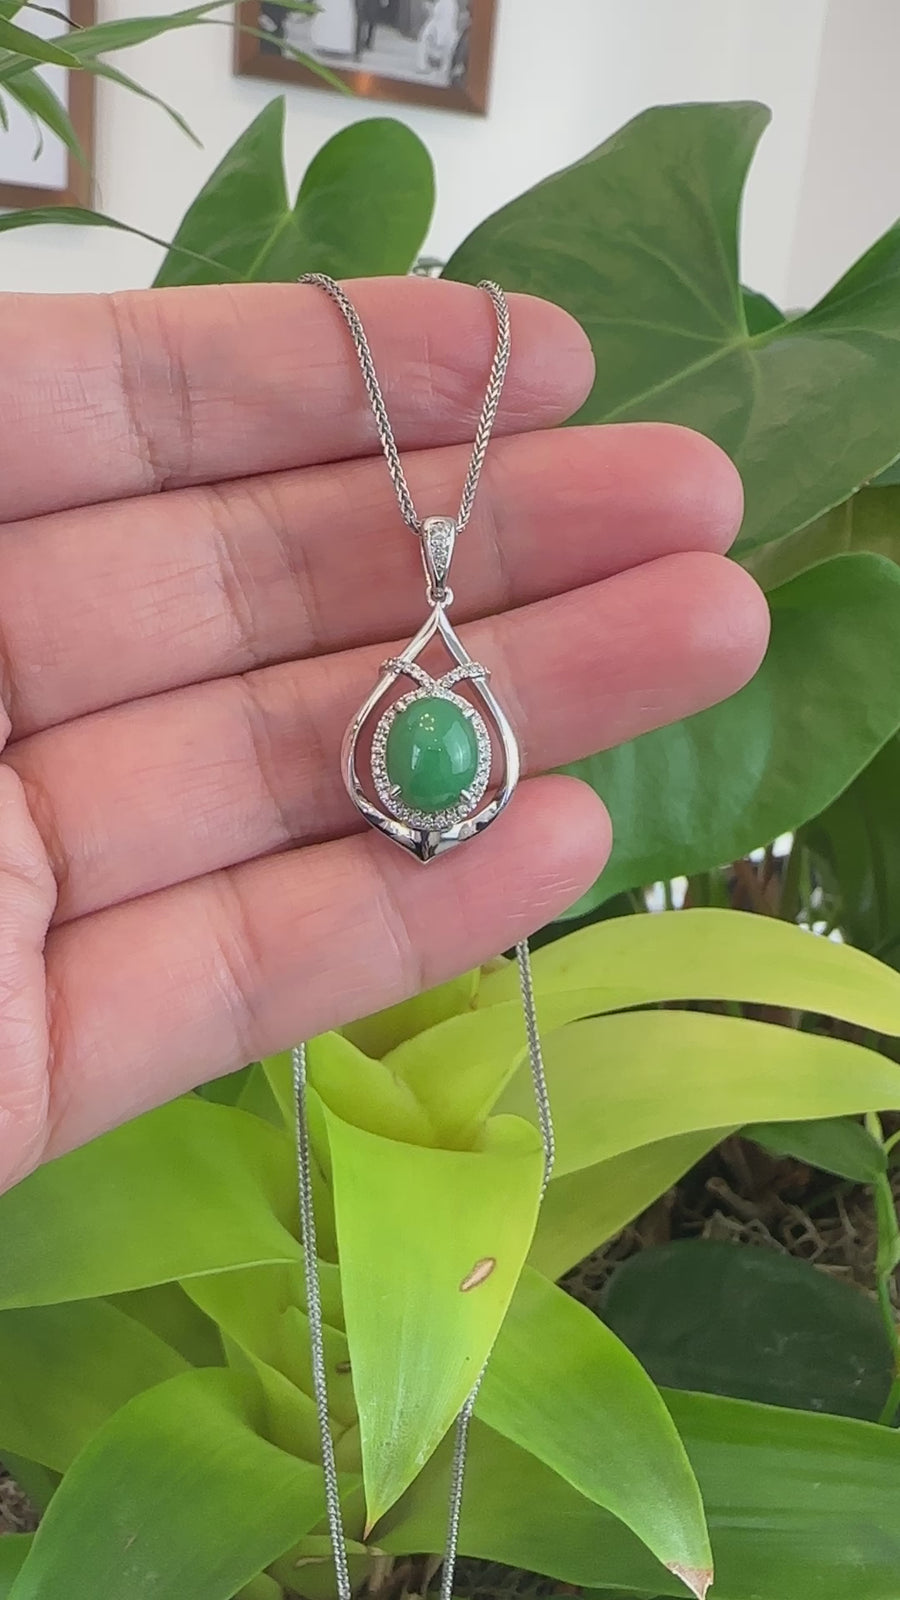 14K White Gold Oval Imperial Jadeite Jade Cabochon Necklace with VS1 Diamonds